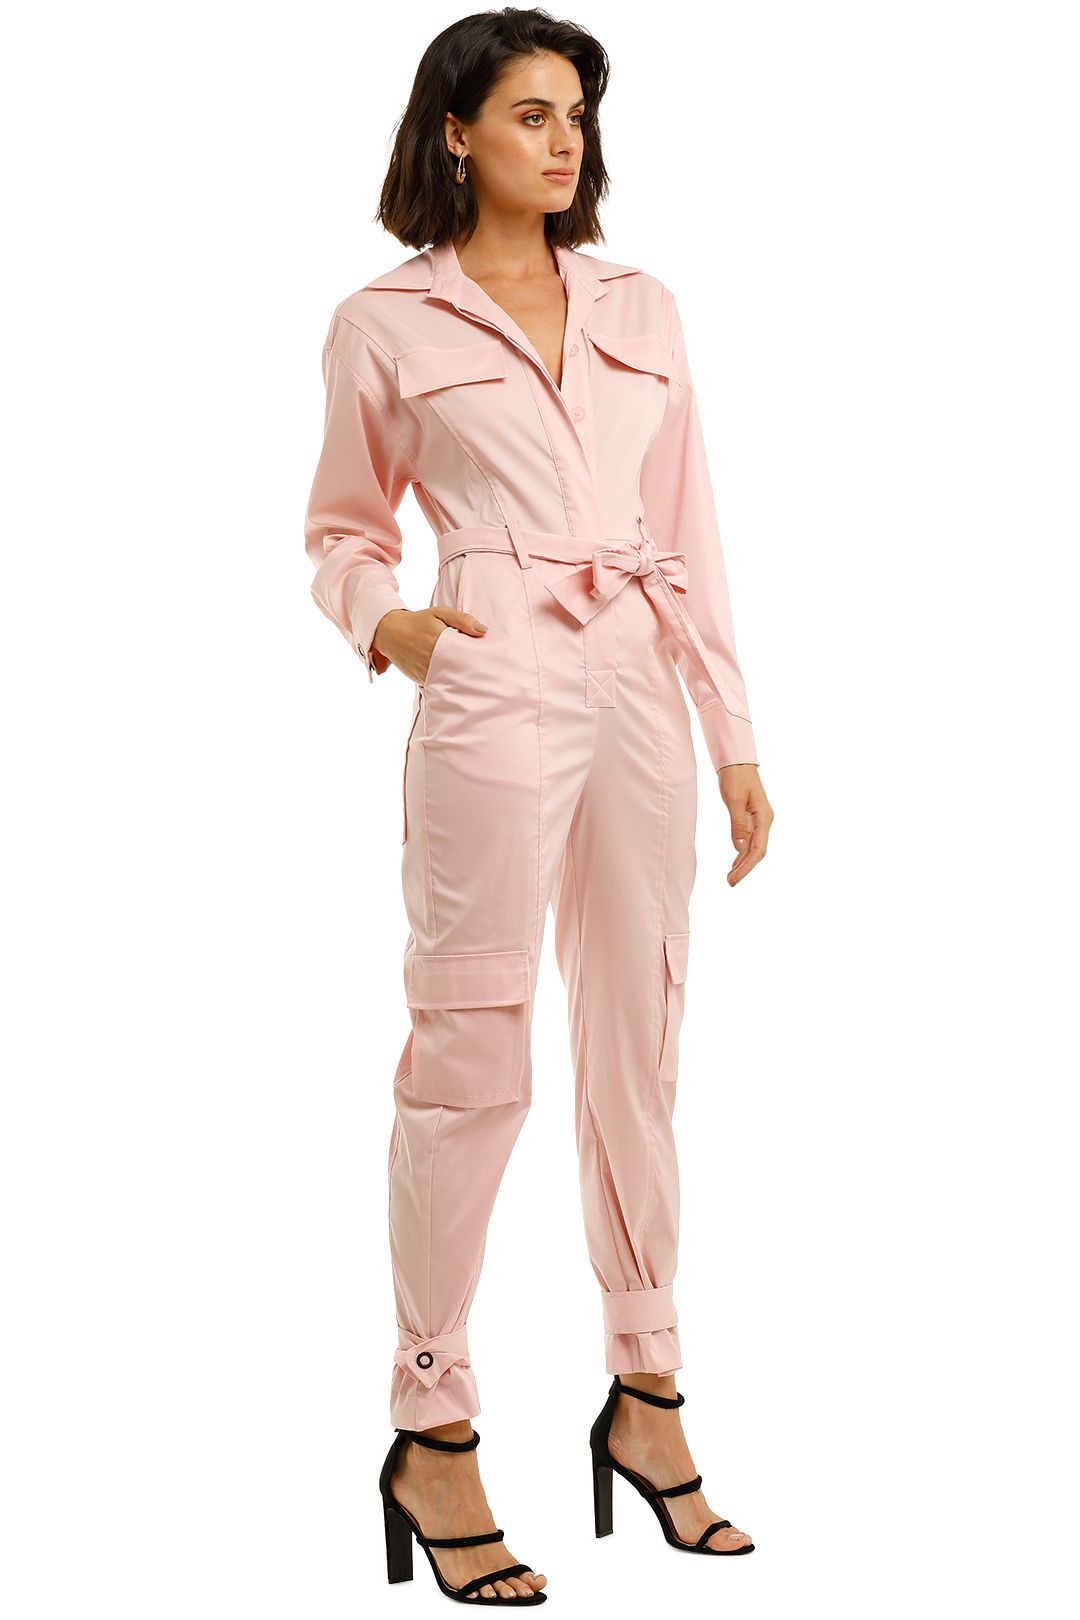 Manning-Cartell-Victory-Lap-Jumpsuit-Pink-Side